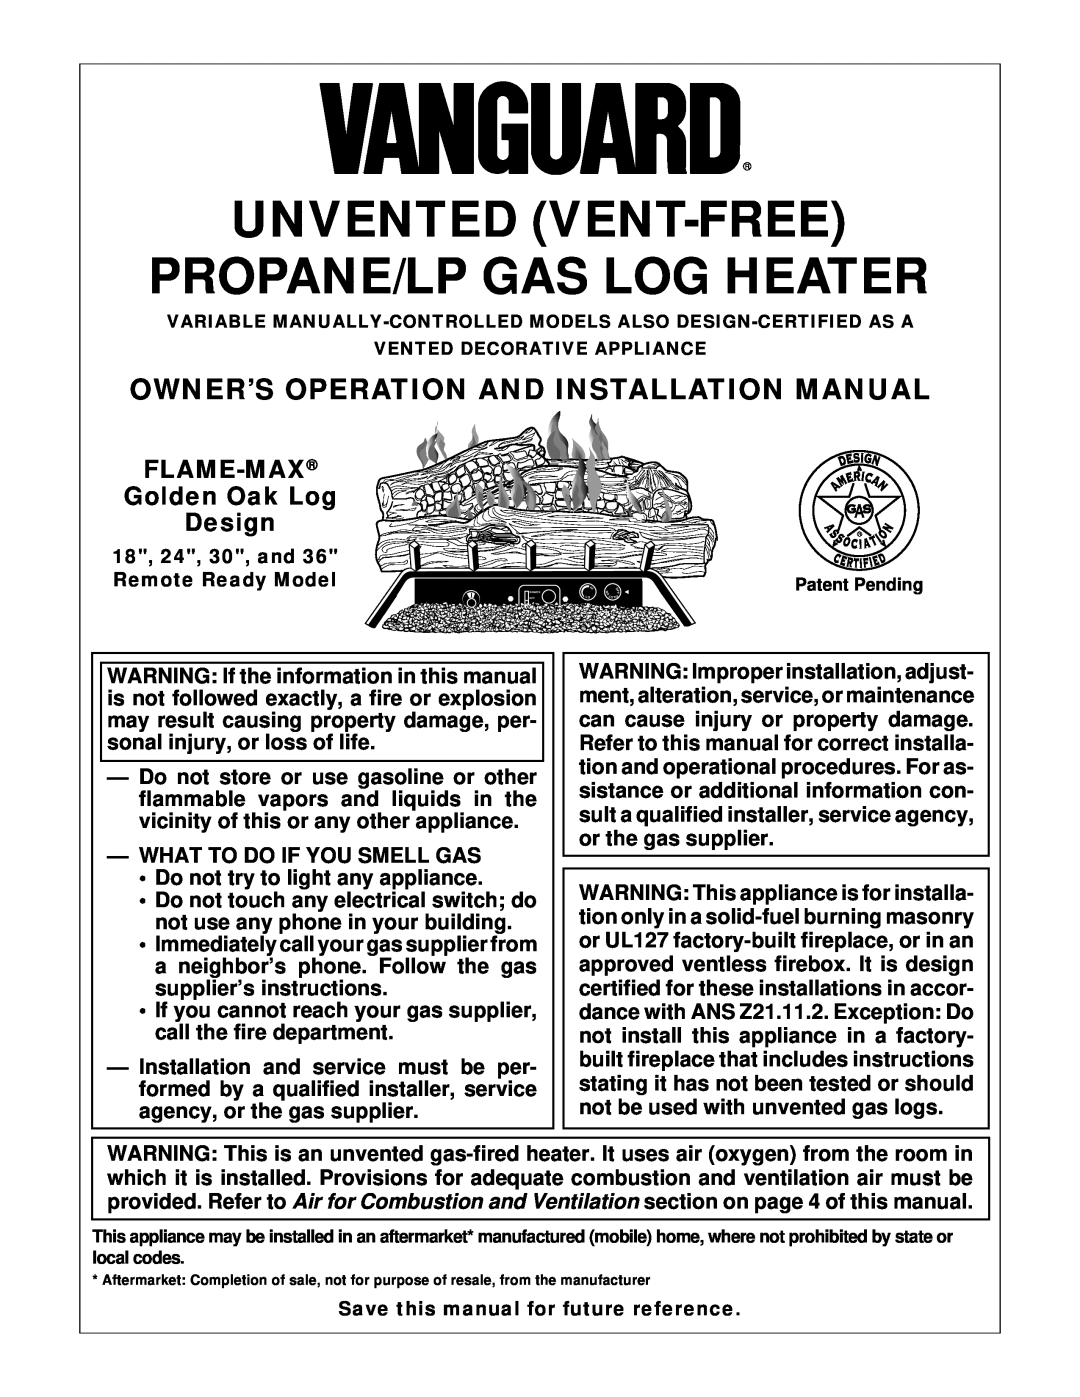 Vanguard Heating UNVENTED (VENT-FREE) PROPANE/LP GAS LOG HEATER installation manual What To Do If You Smell Gas 